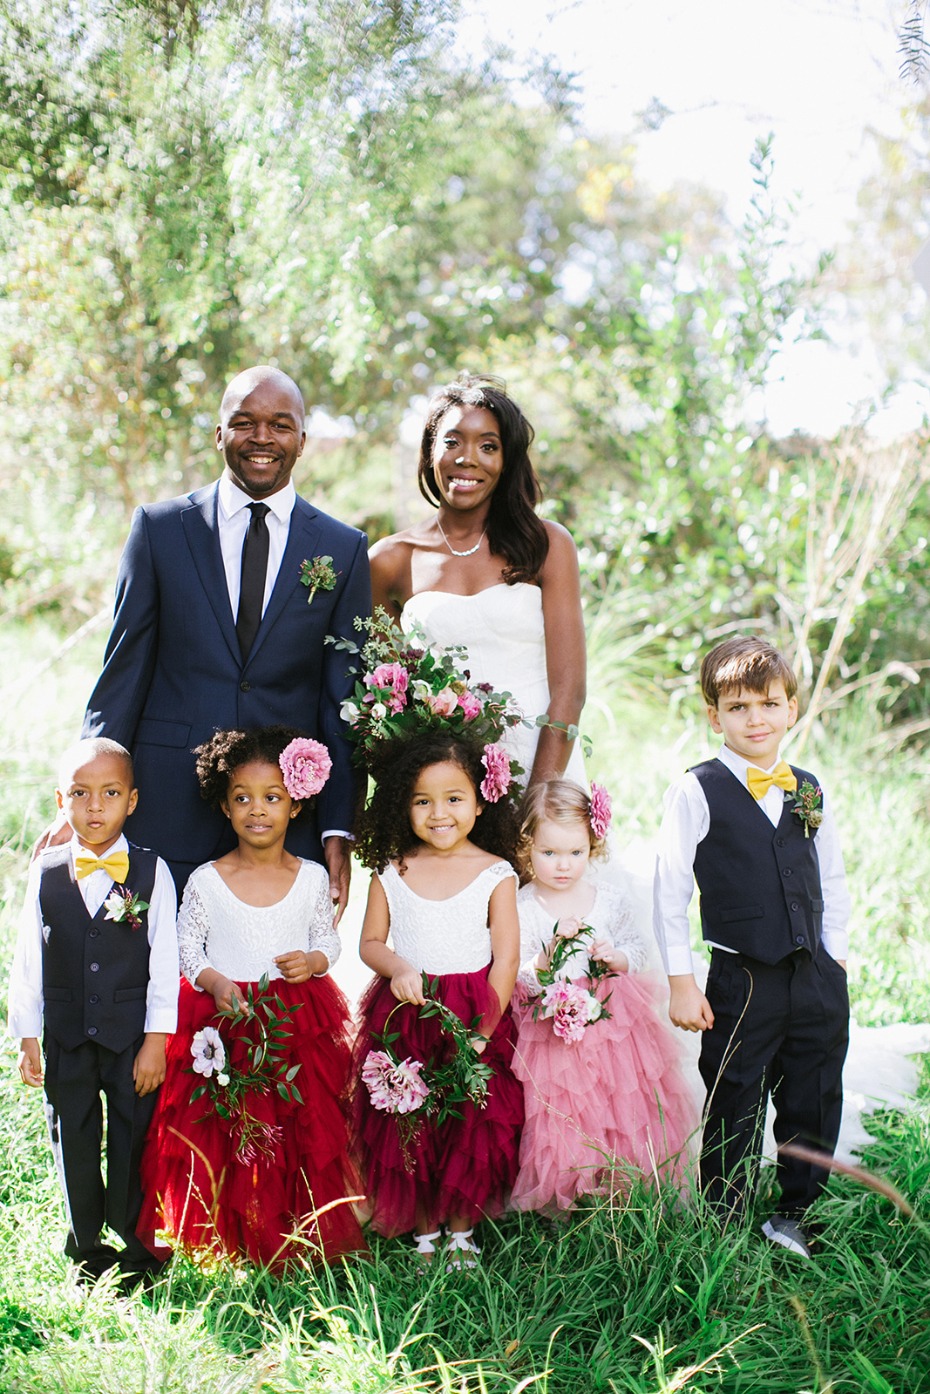 the bride groom and their flower girls and ring bearers